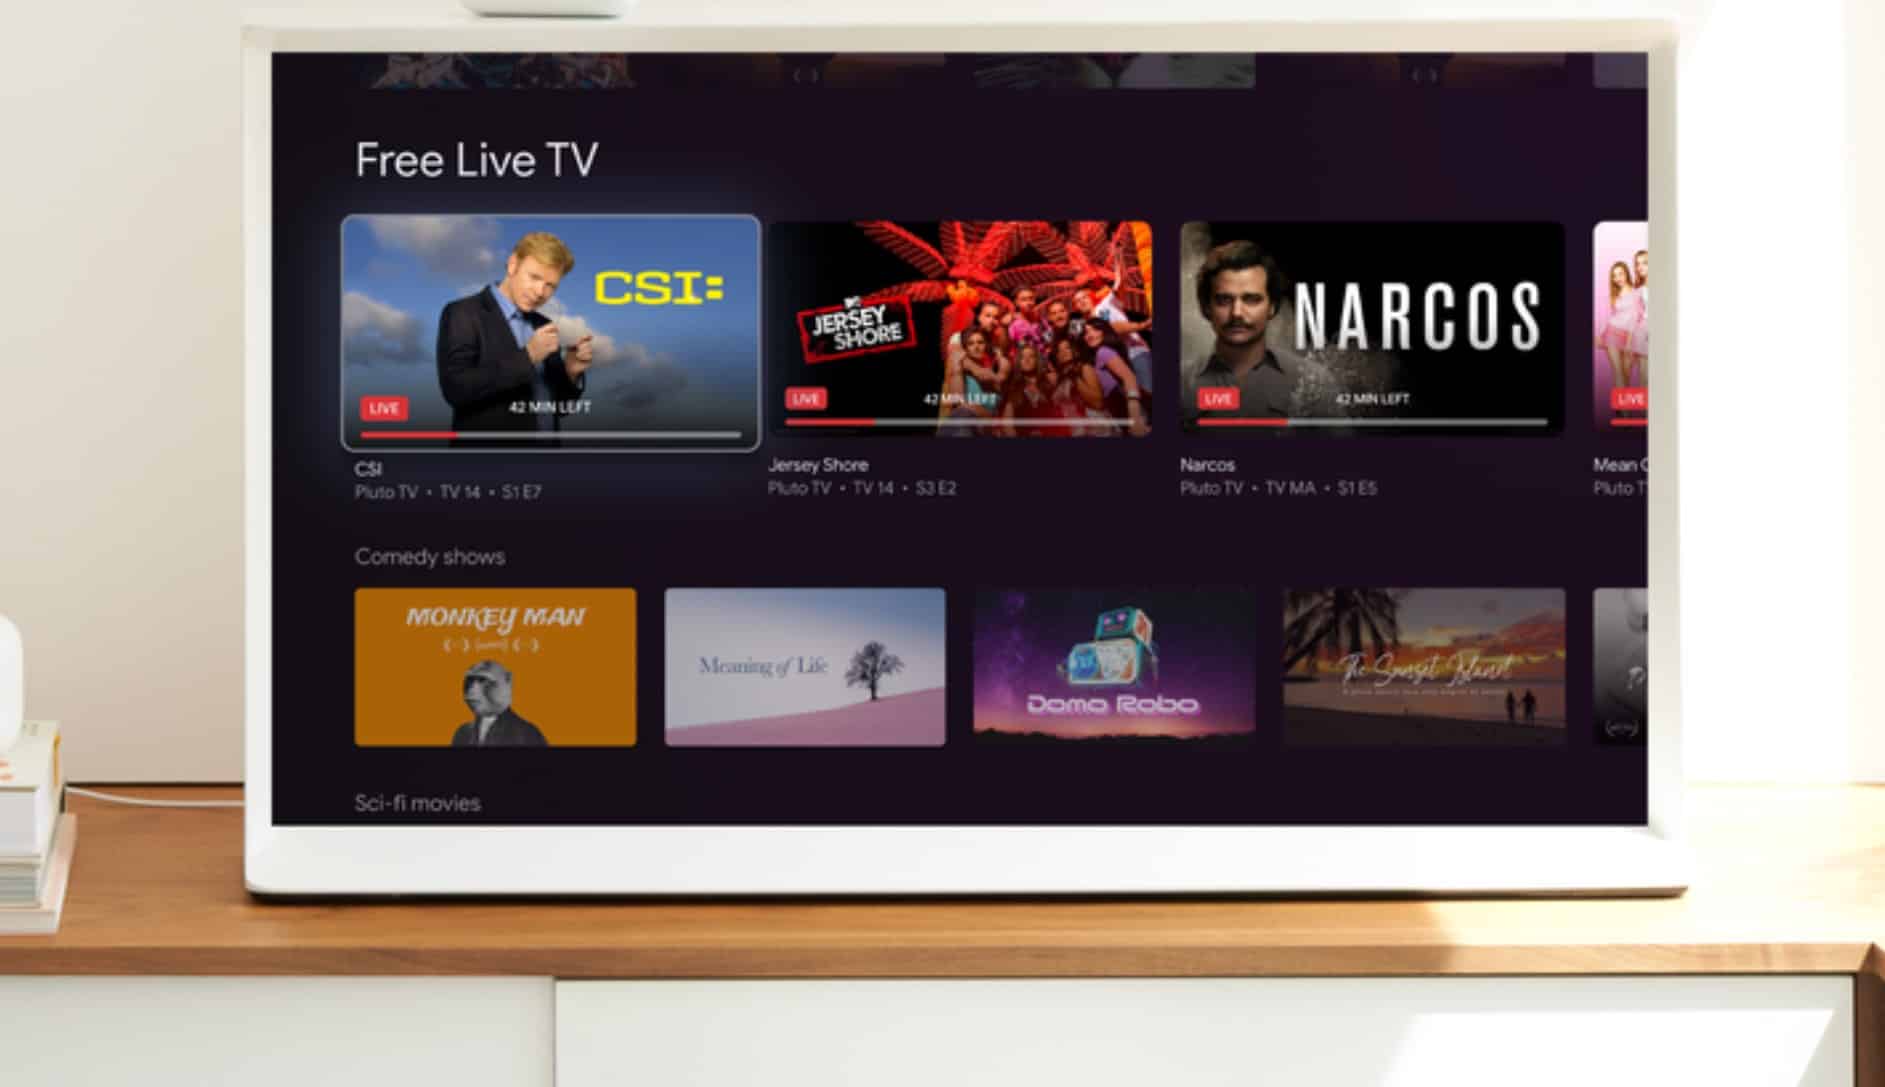 Google brings more than 300 free live TV channels to Google TV